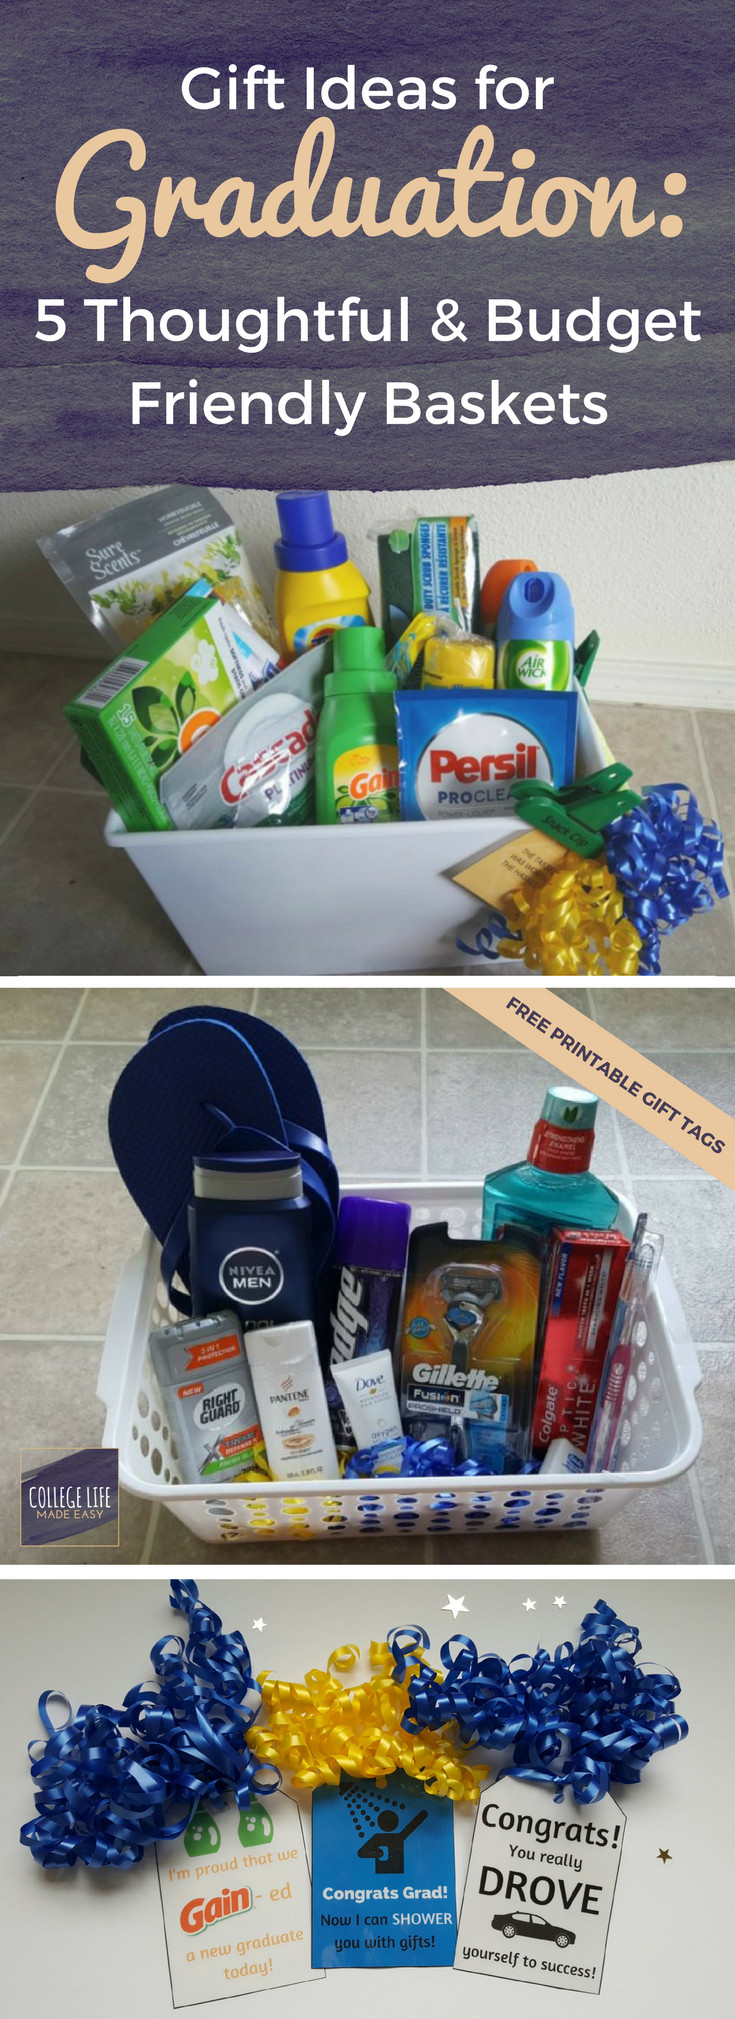 University Graduation Gift Ideas
 5 DIY Going Away to College Gift Basket Ideas for Boys